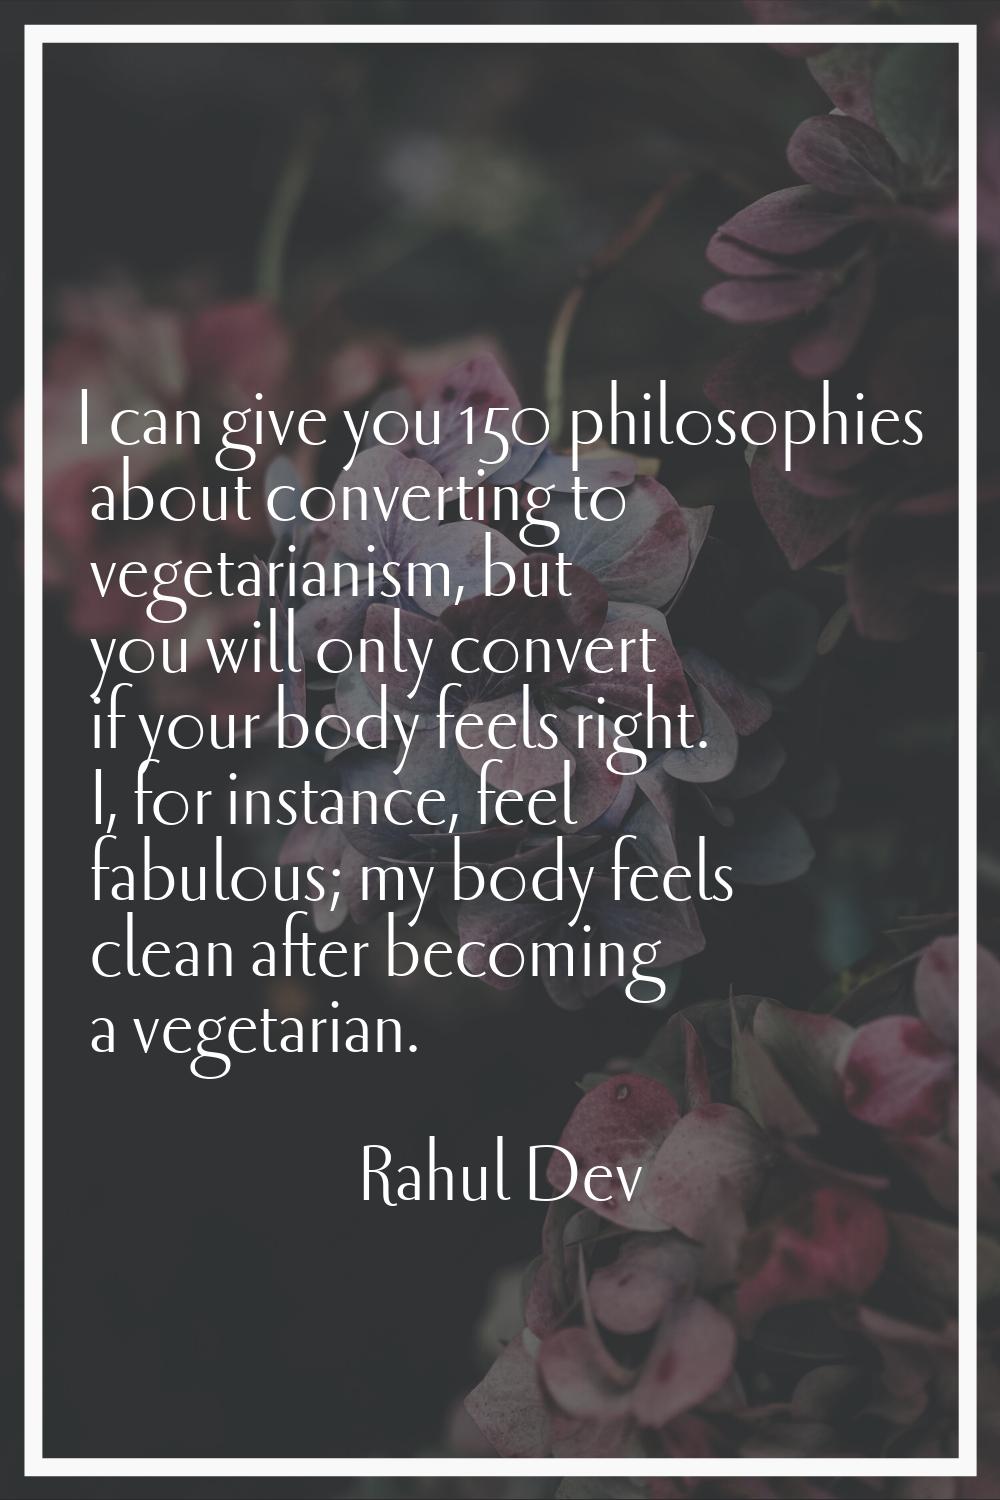 I can give you 150 philosophies about converting to vegetarianism, but you will only convert if you